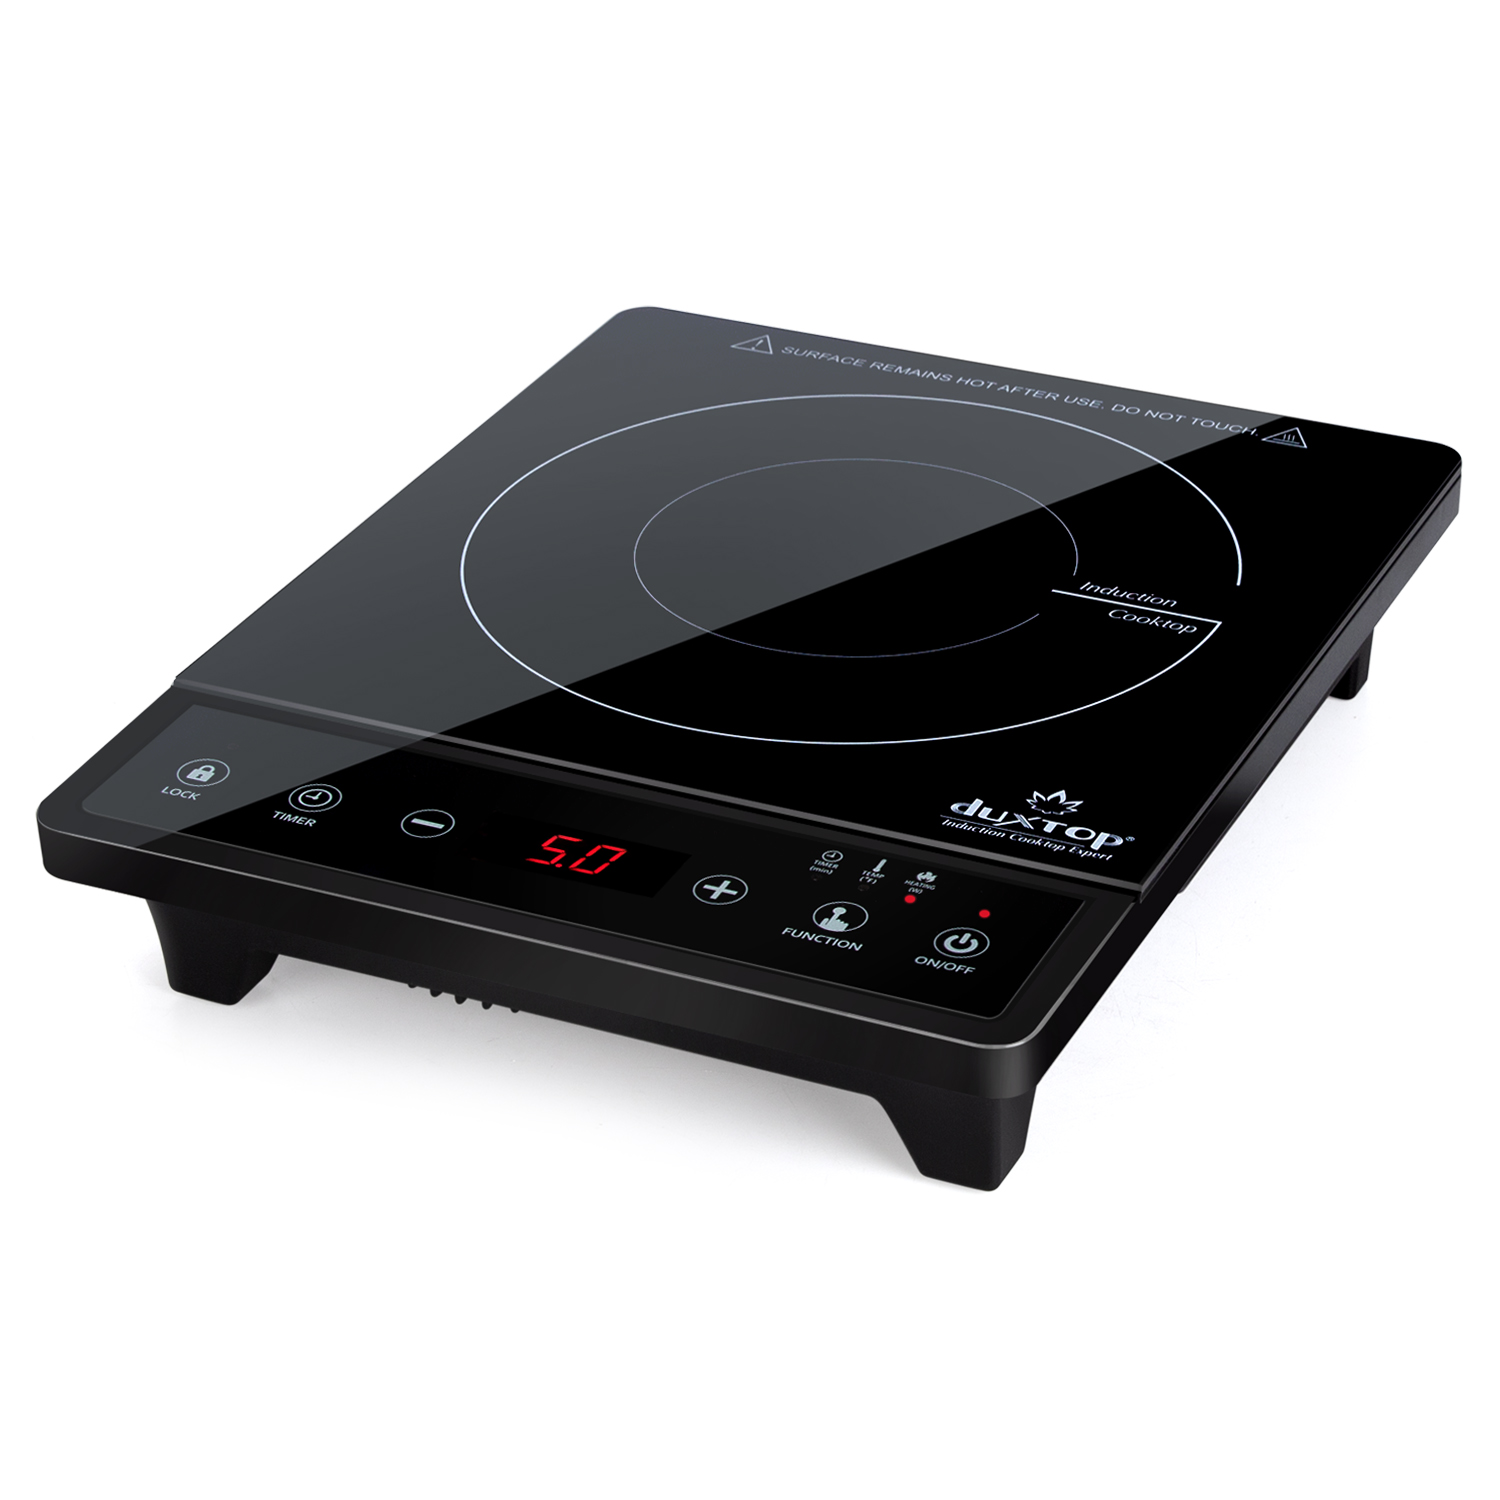 Duxtop 1800W Portable Induction Cooktop 2 Burner, Built-In Countertop Burners with Adjustable Temperature Control, Sensor Touch Induction Burner